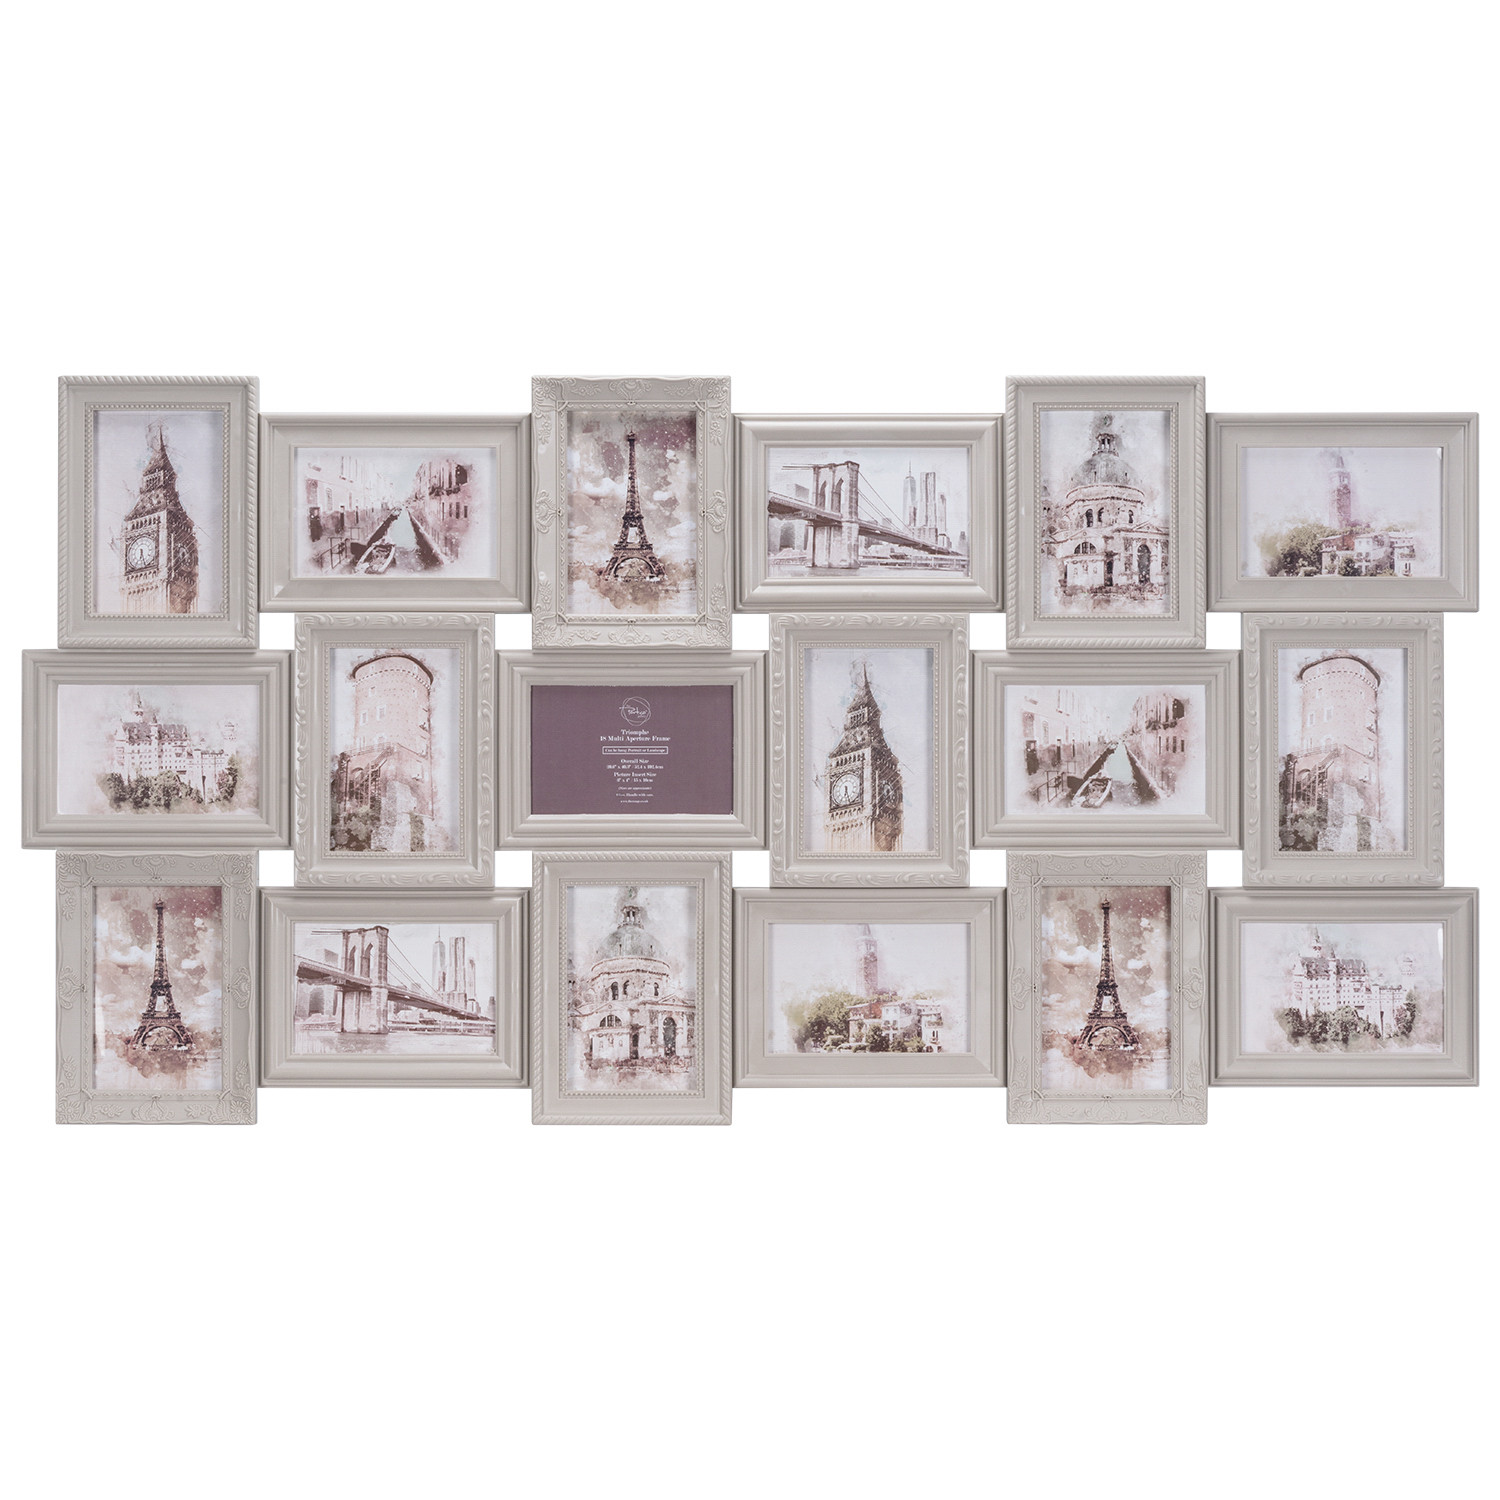 The Port. Co Gallery Triomphe 18 Multi Aperture Photo Frame Image 1